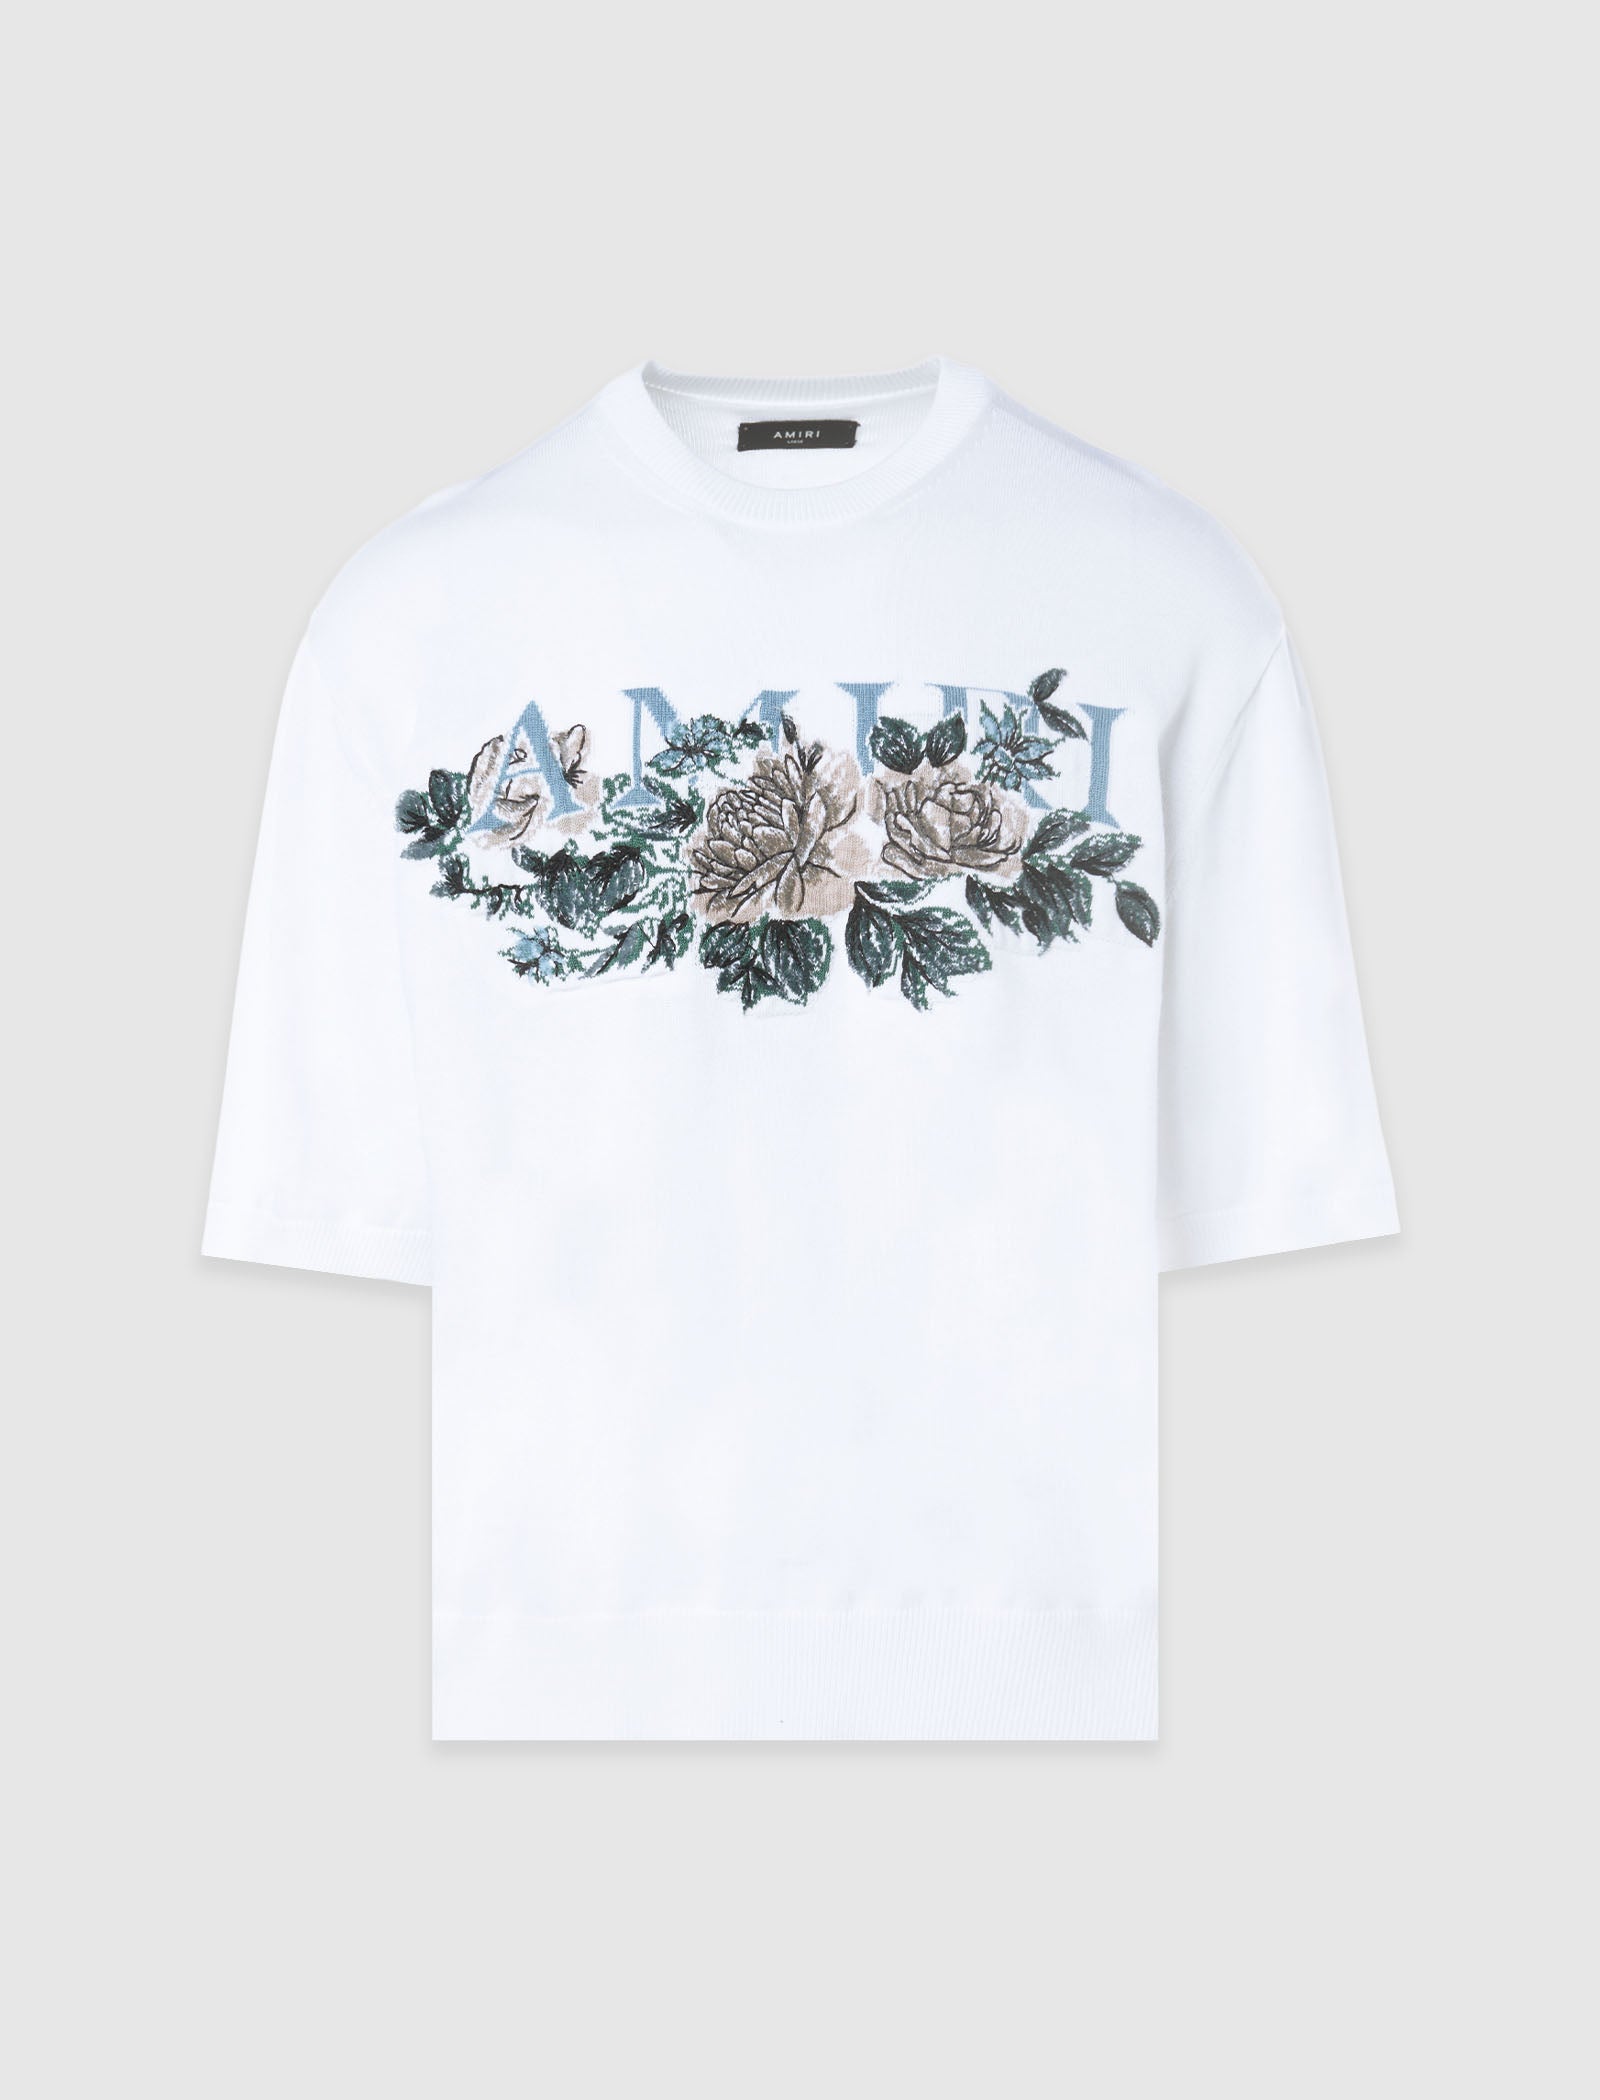 KNIT FLORAL LOGO TEE